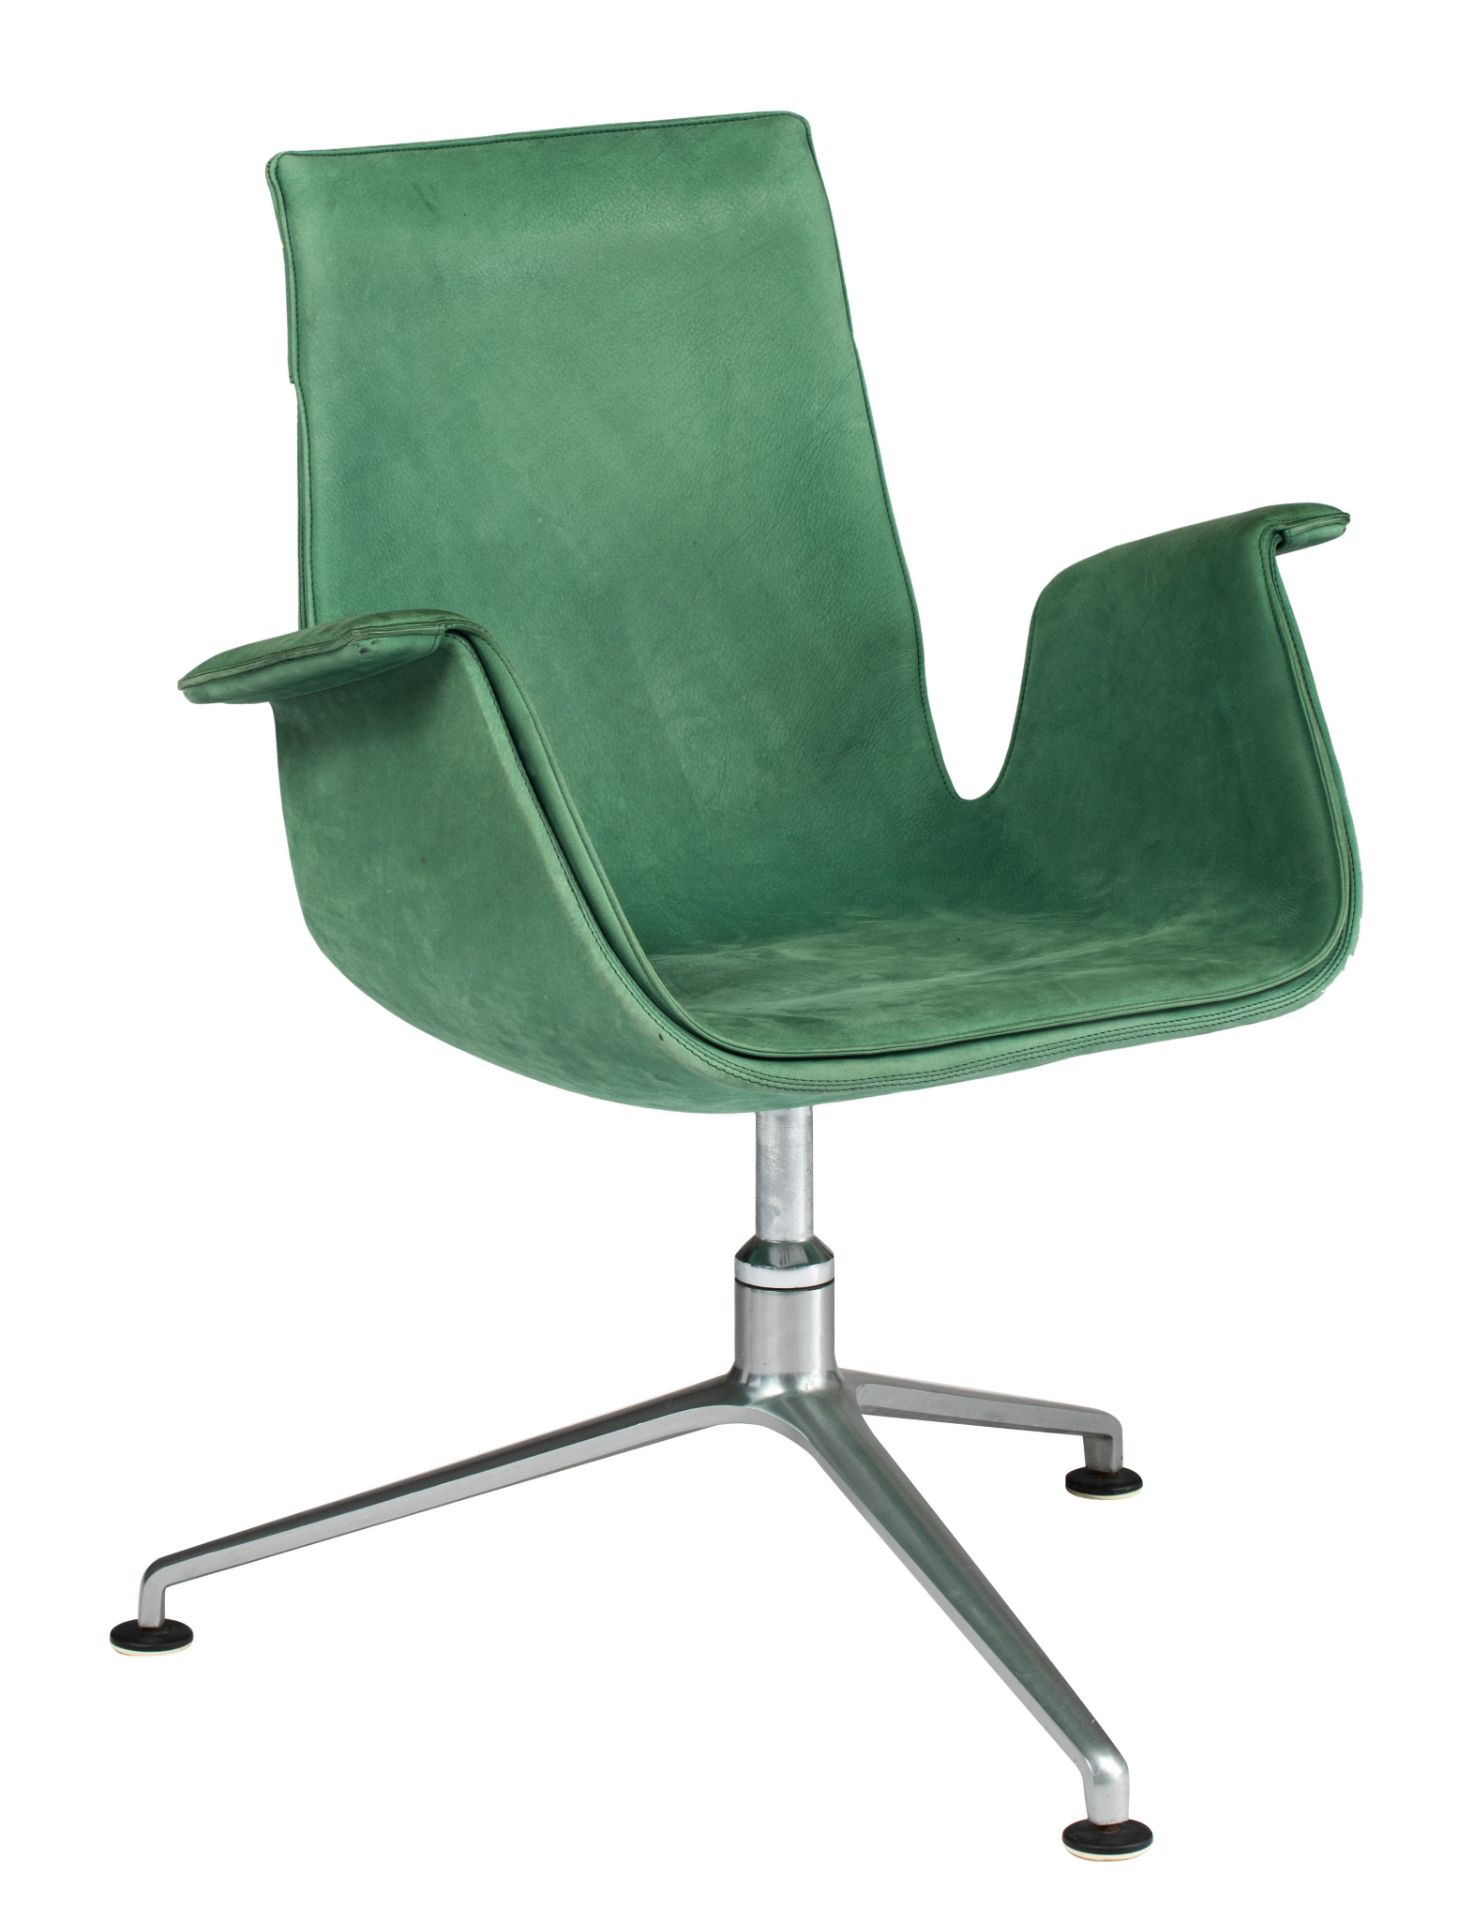 A FK 6725 Bird Chair, design by Preben Fabricius and Jorgen Kastholm for Alfred Kill International,